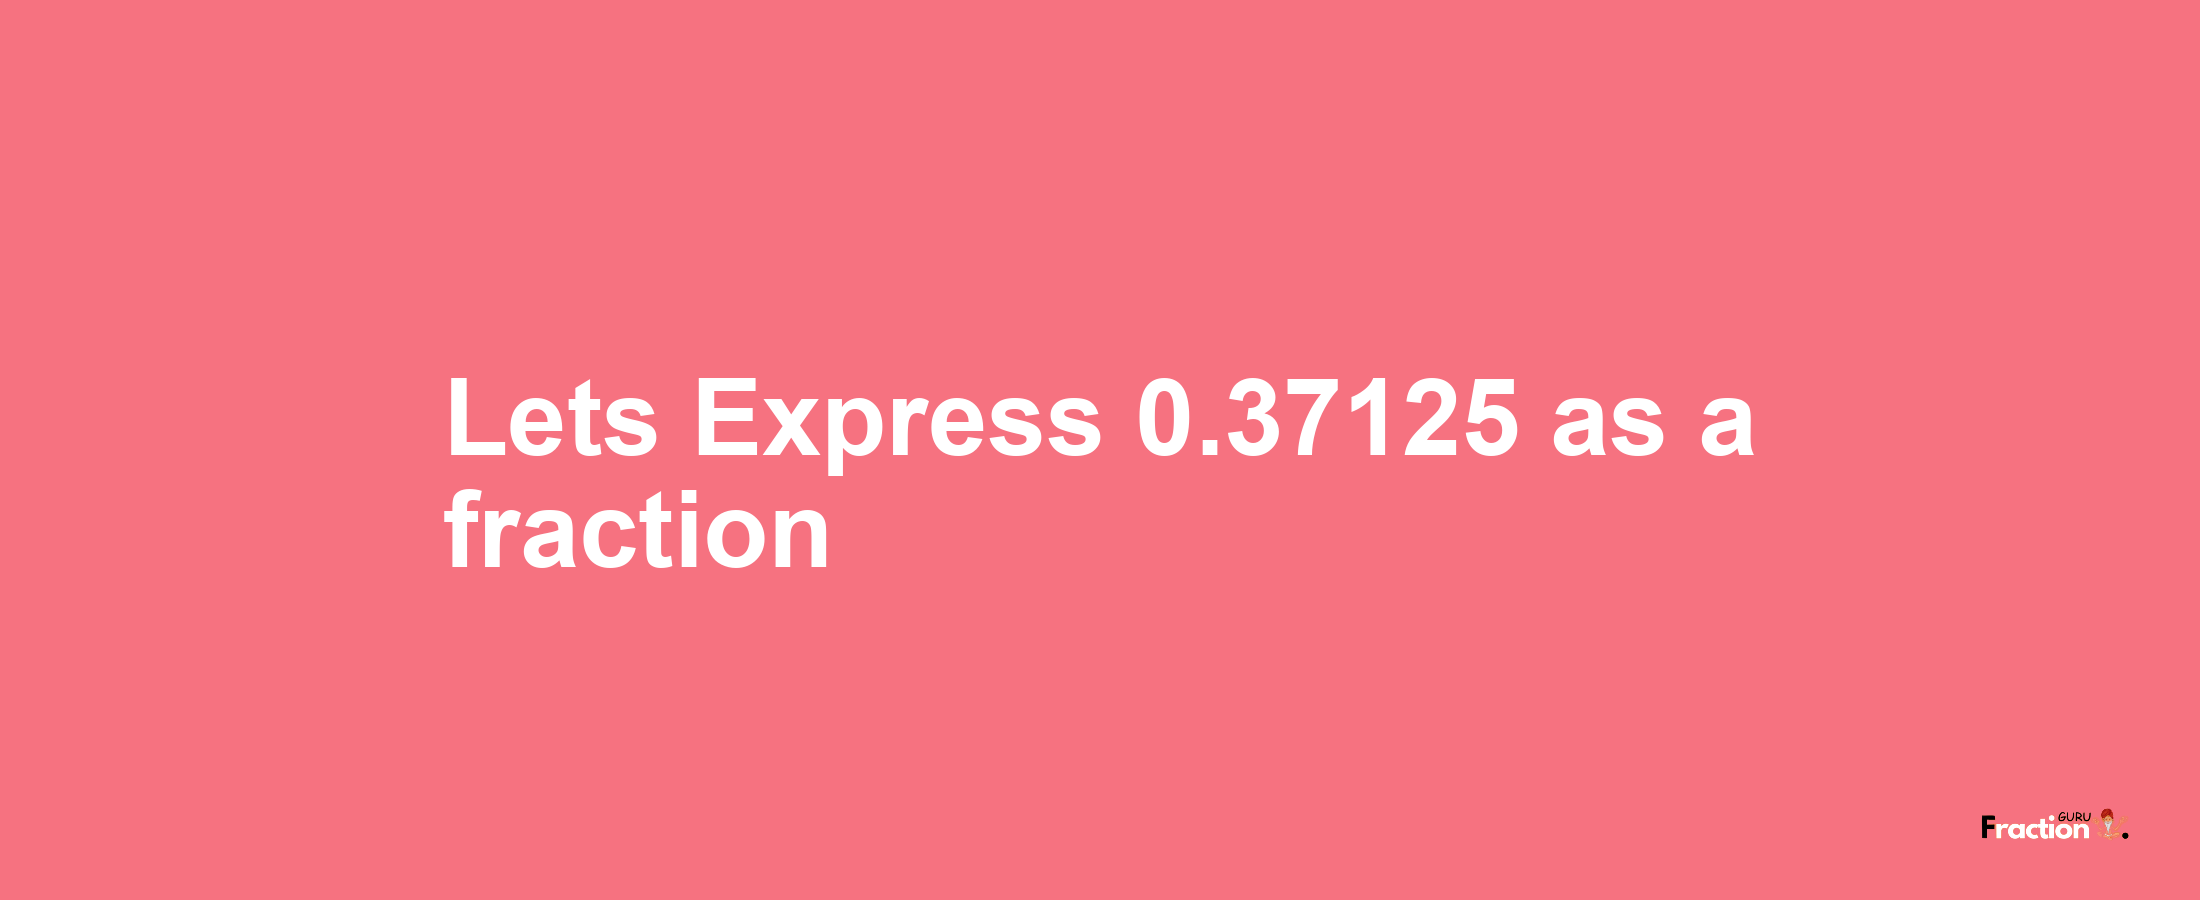 Lets Express 0.37125 as afraction